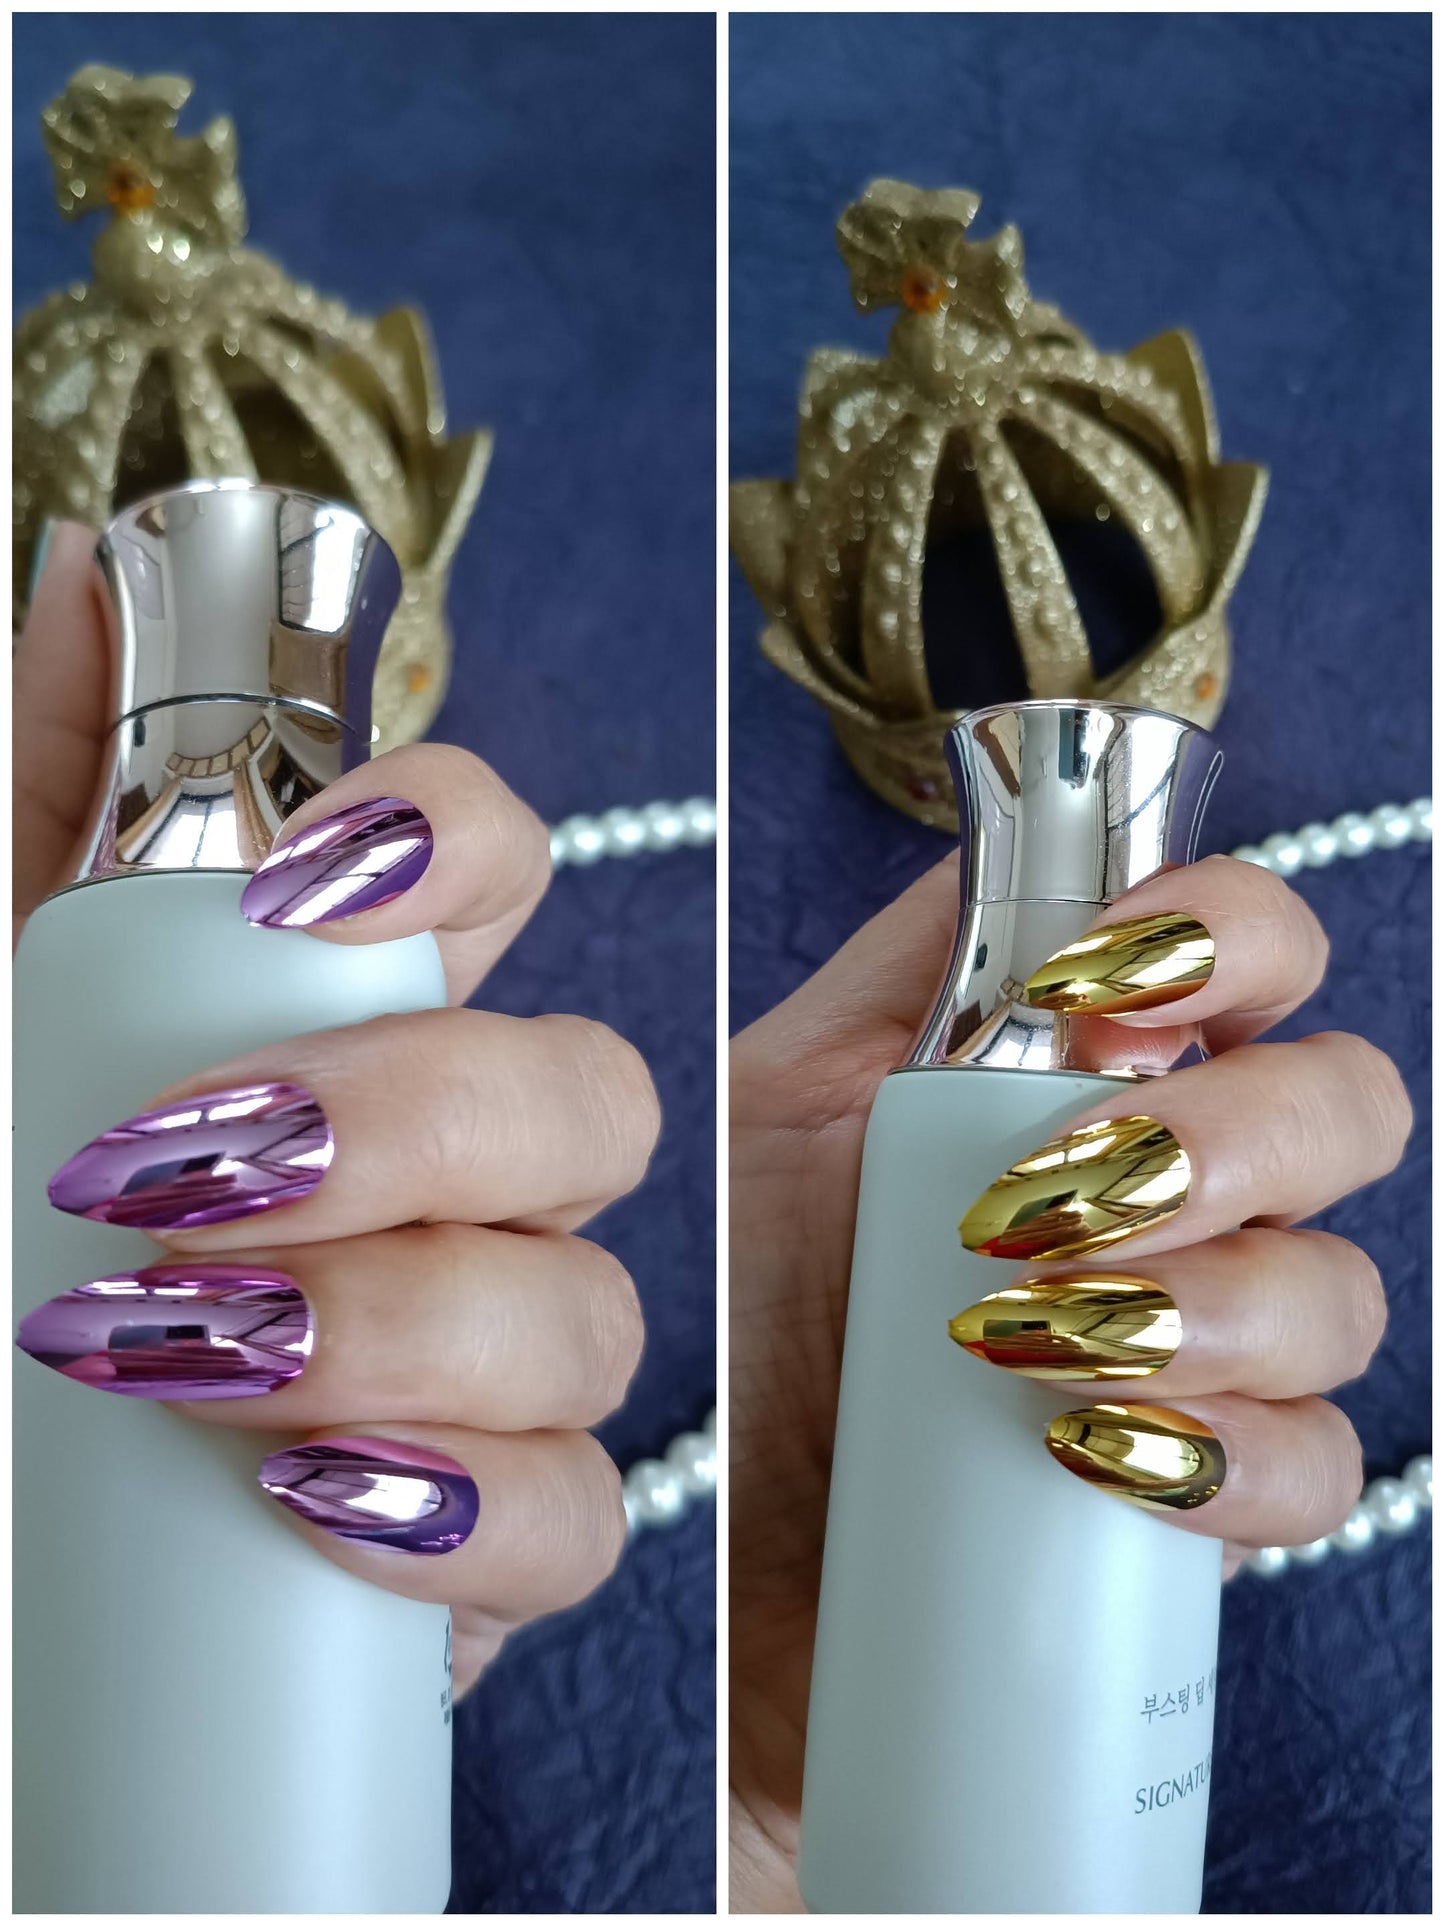 Combo of Acrylic/ Press-on Designer Nails with Glue Tabs  | Artificial Nails Under 200  - Almond Shaped Purple Chromatic-Golden Chromatic